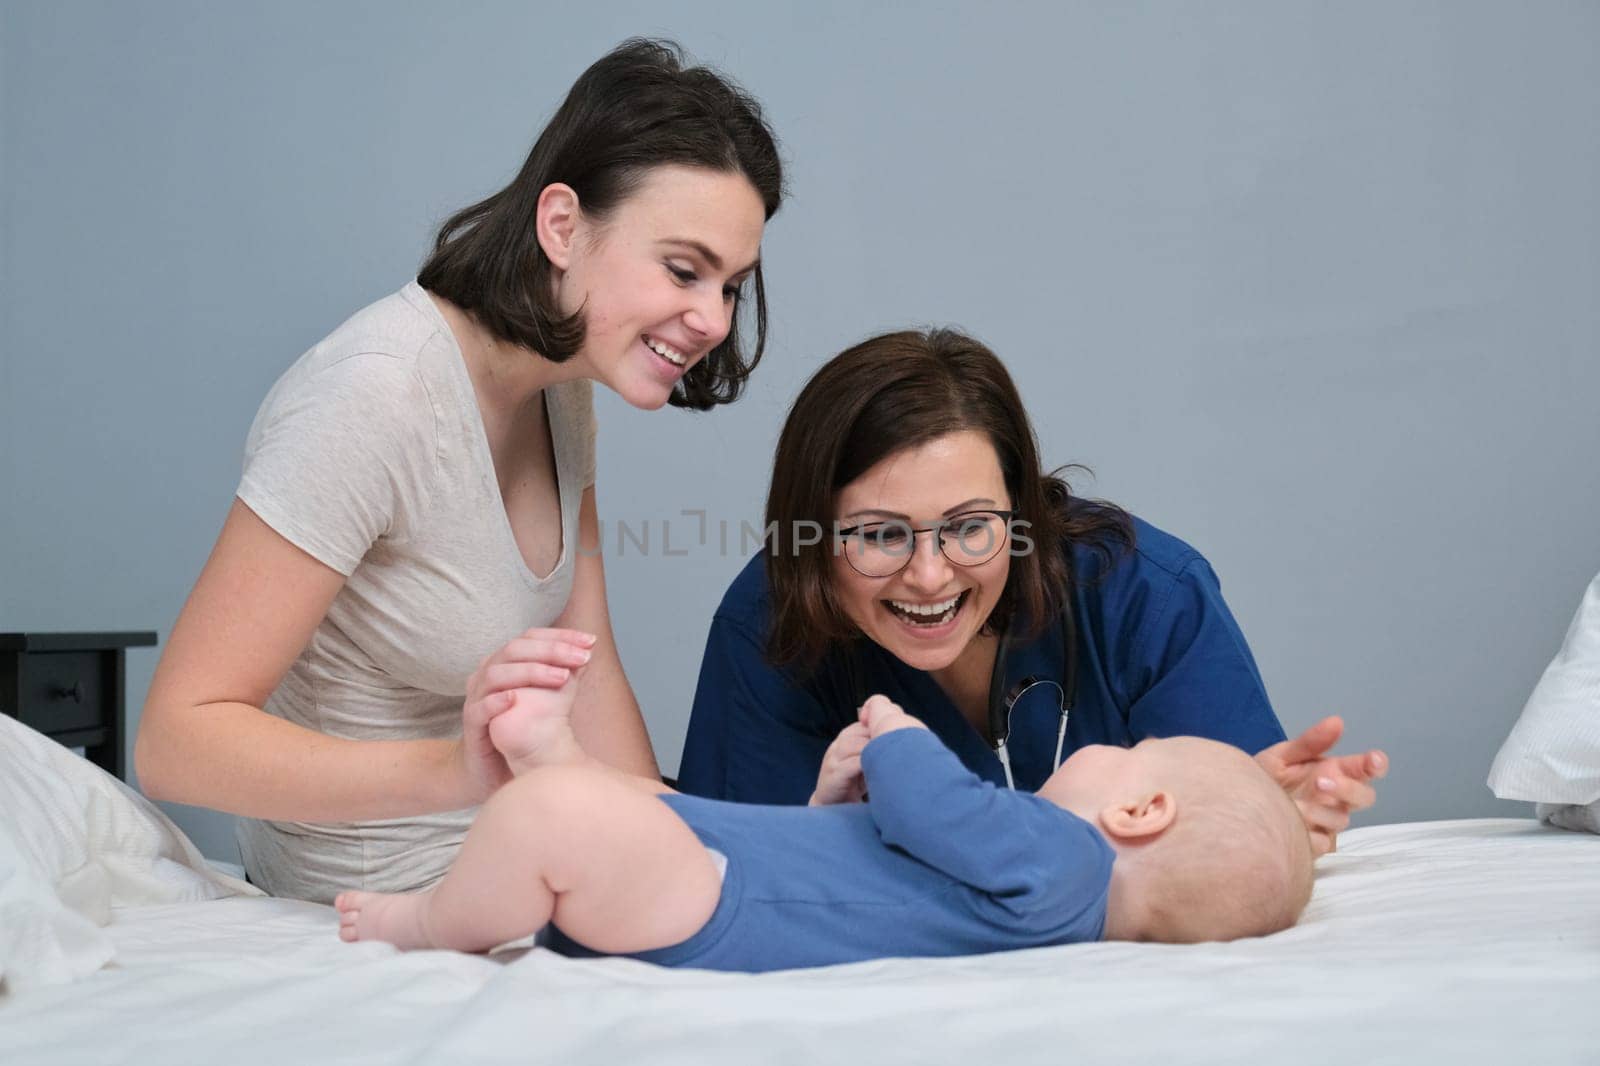 Pediatrician in blue uniform with stethoscope talking to young mother of baby by VH-studio